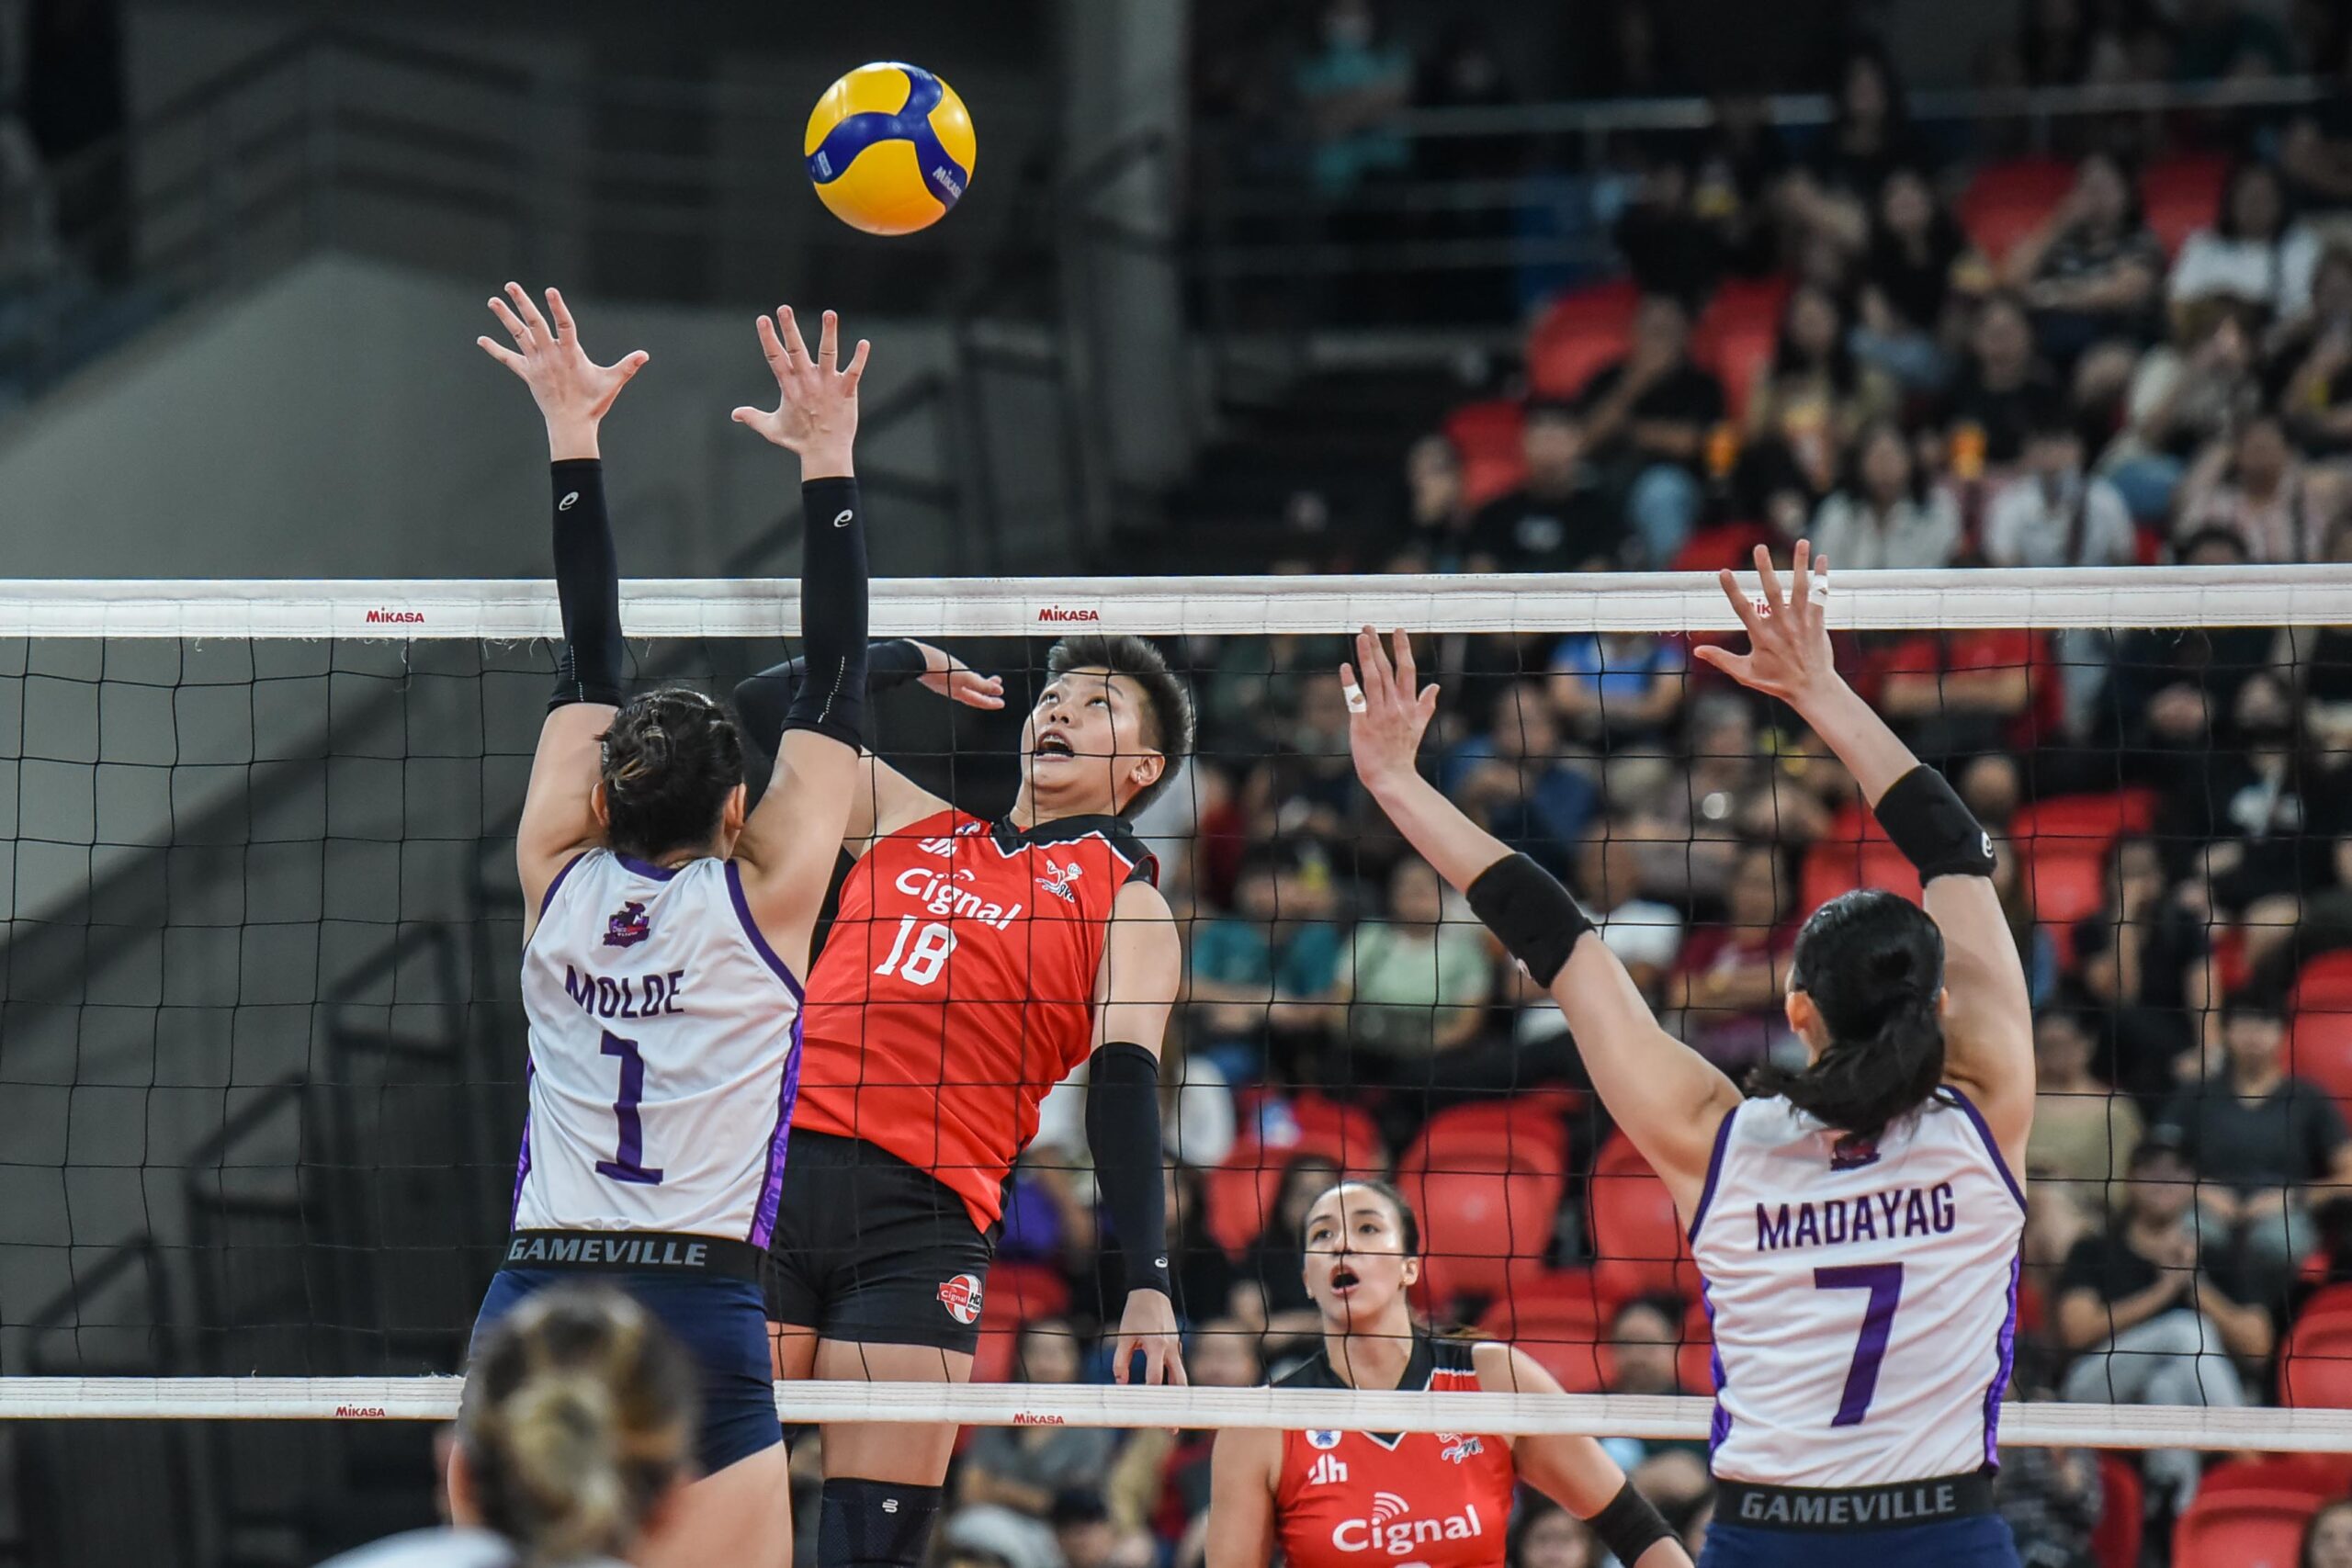 PVL-AFC-Semis-Cignal-vs.-Choco-Mucho-Ria-Meneses-5033-scaled PVL: No meltdowns this time as Choco Mucho sweeps Cignal, forces do-or-die News PVL Volleyball  - philippine sports news